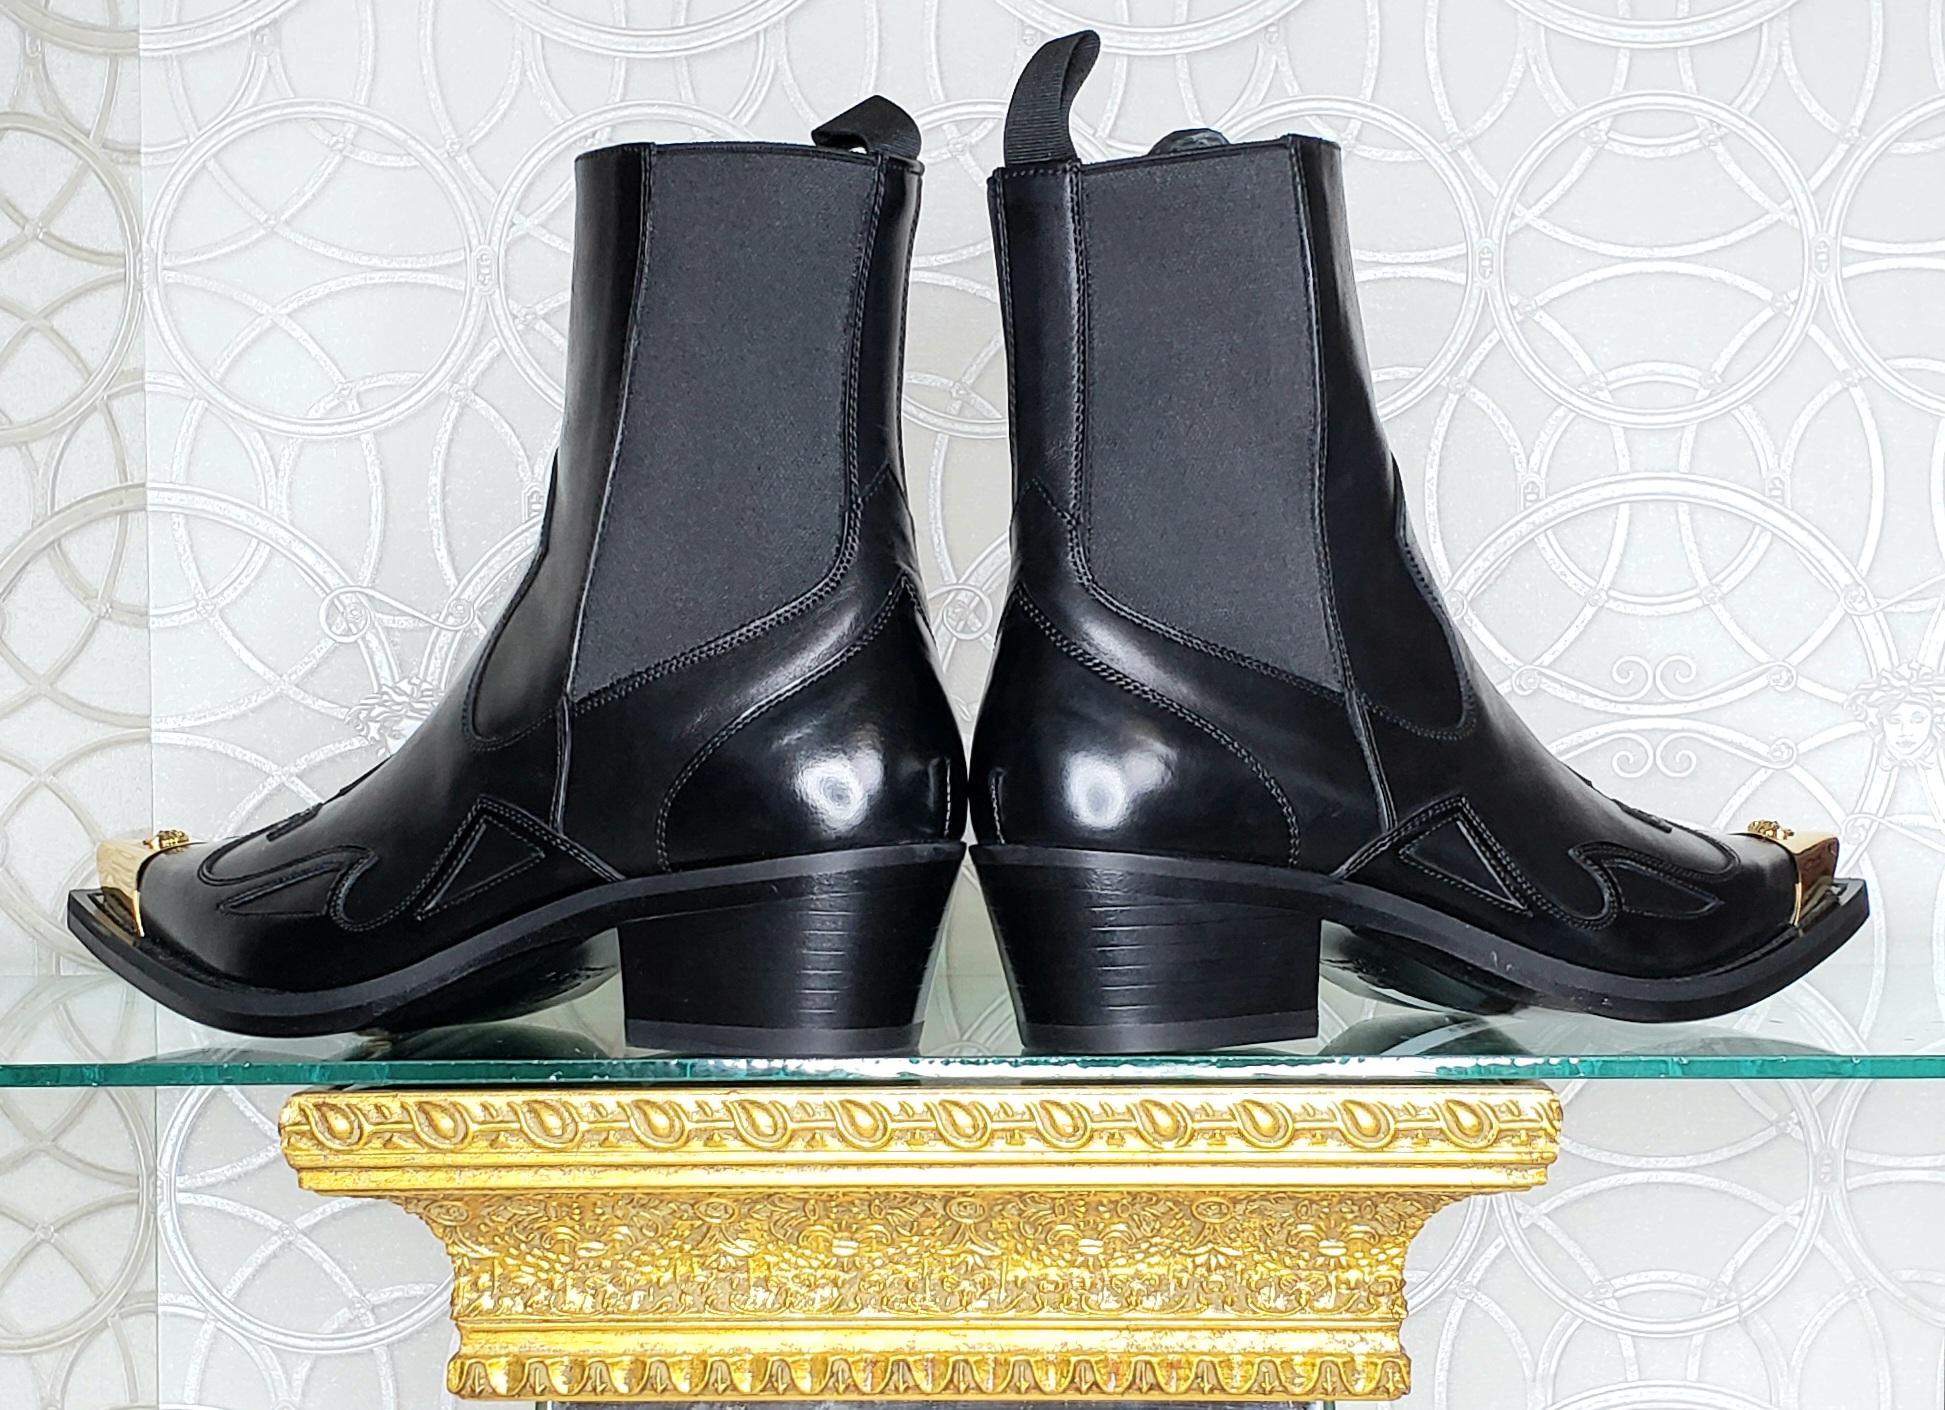 VERSACE GOTHIC SIGNS 24k GOLD PLATED MEDUSA TIPS BLACK LEATHER BOOTS 40.5 - 7.5 4